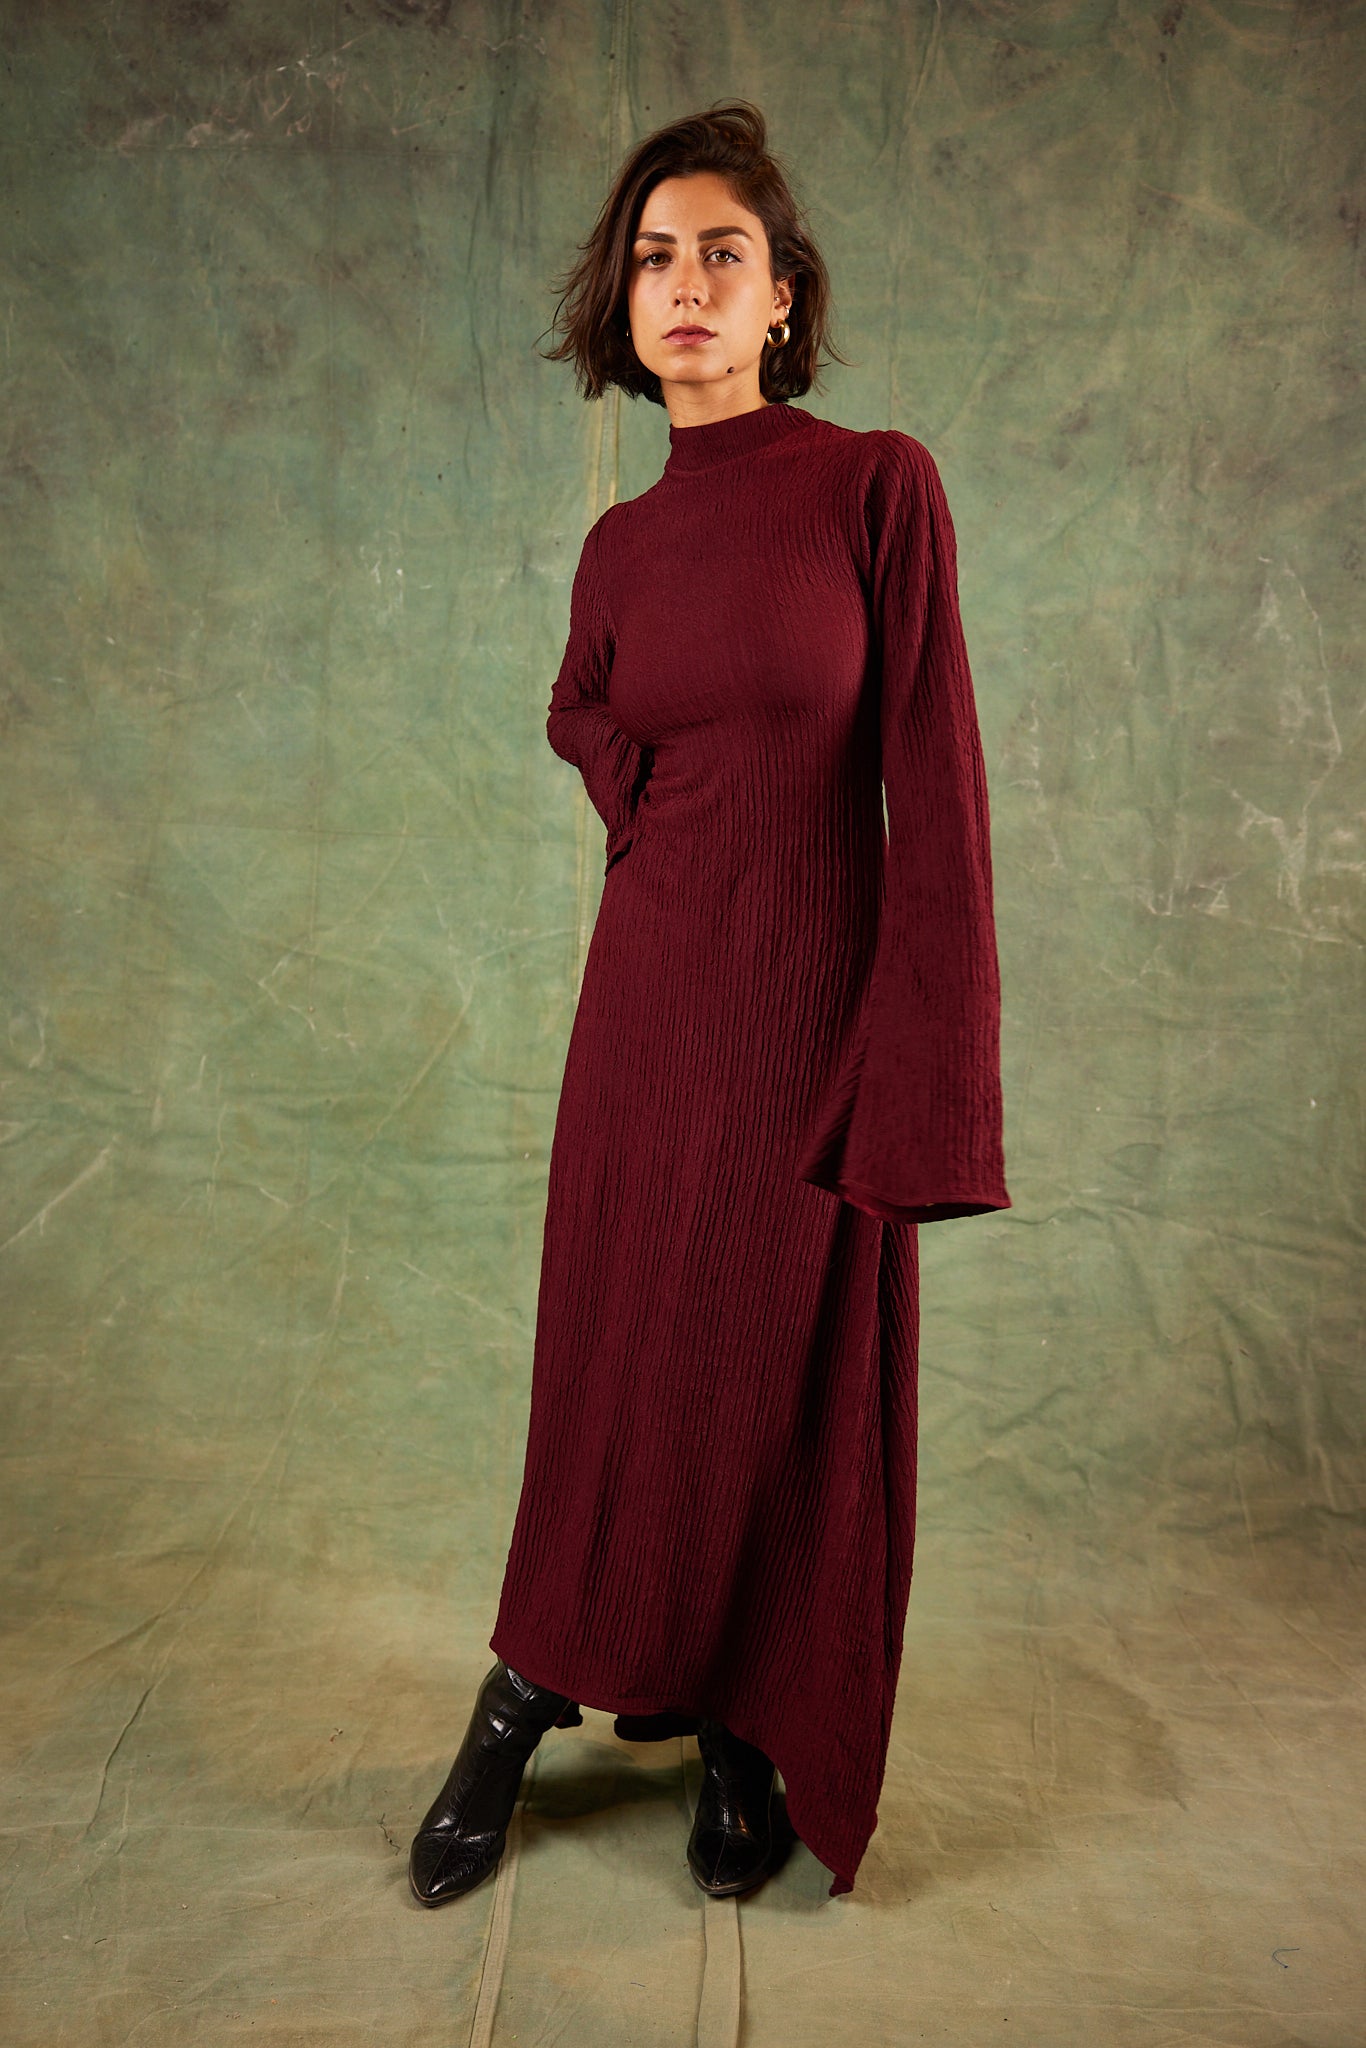 THE DRESS IT UP OR DOWN DRESS IN BURGUNDY